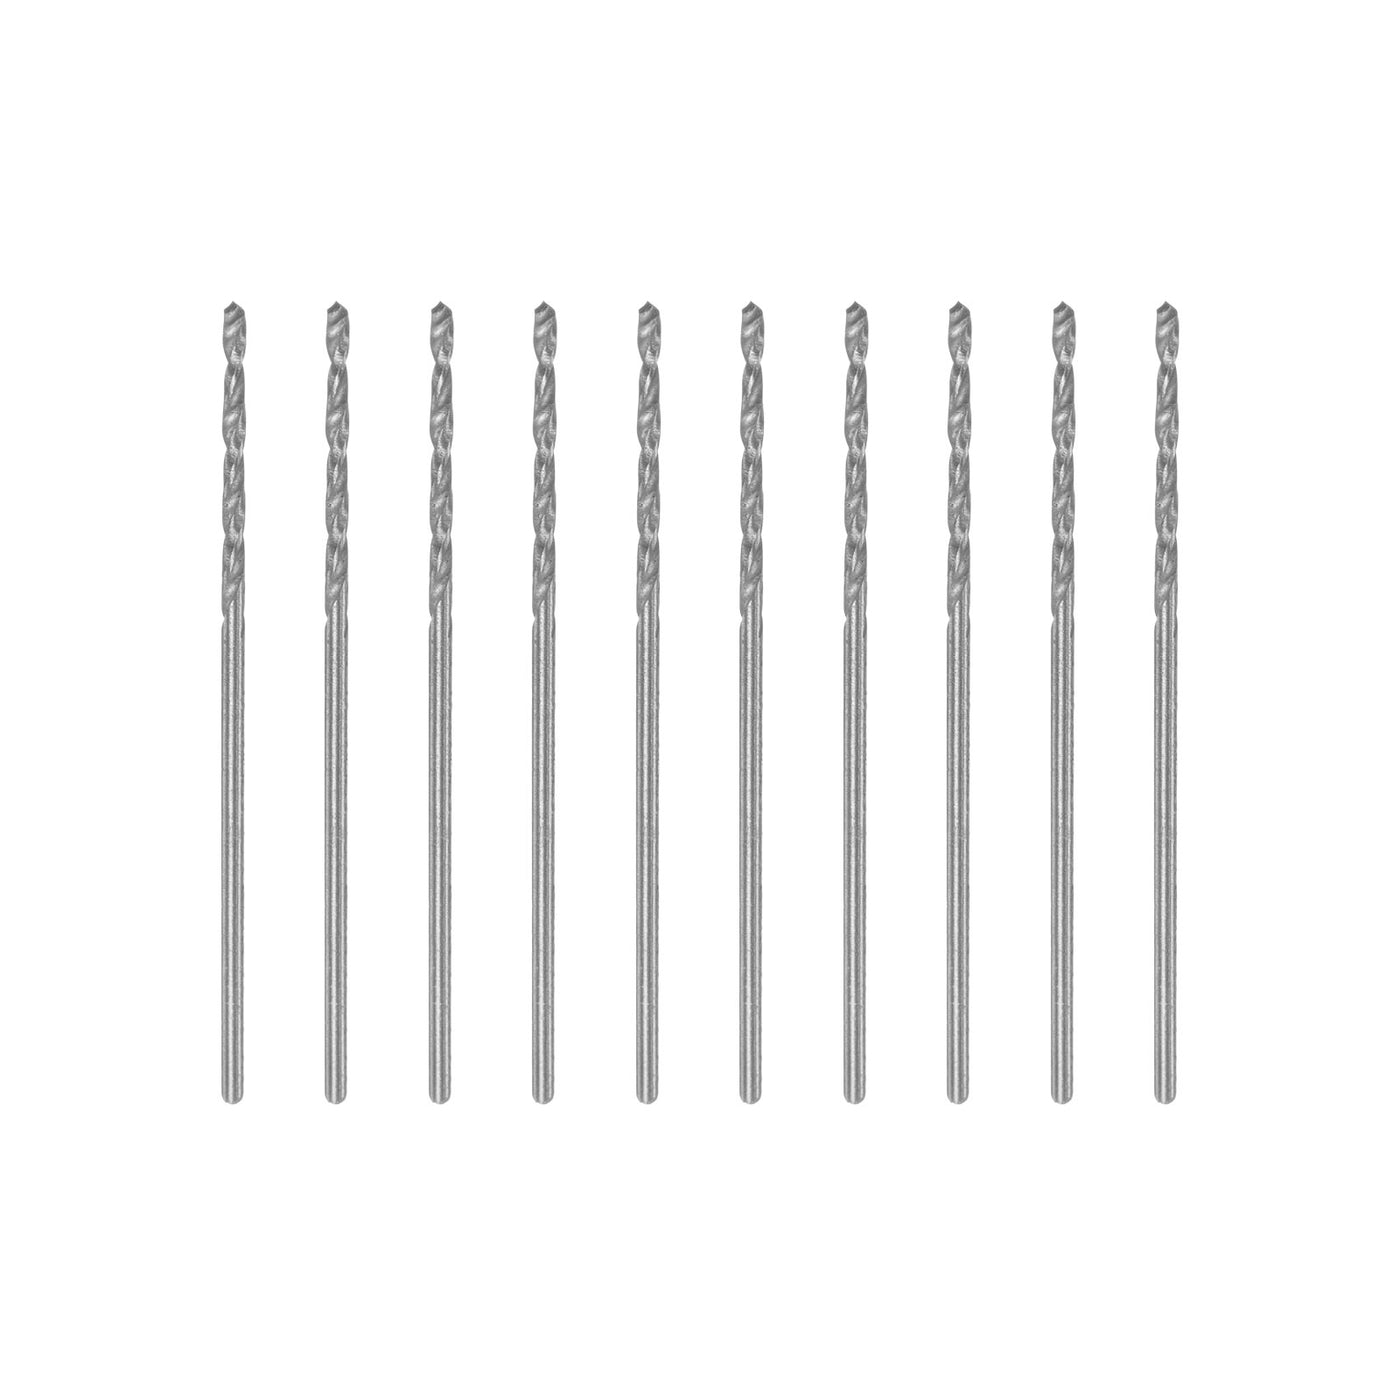 uxcell Uxcell 10 Pcs 0.95mm High Speed Steel Drill Bits, Fully Ground 32mm Length Drill Bit